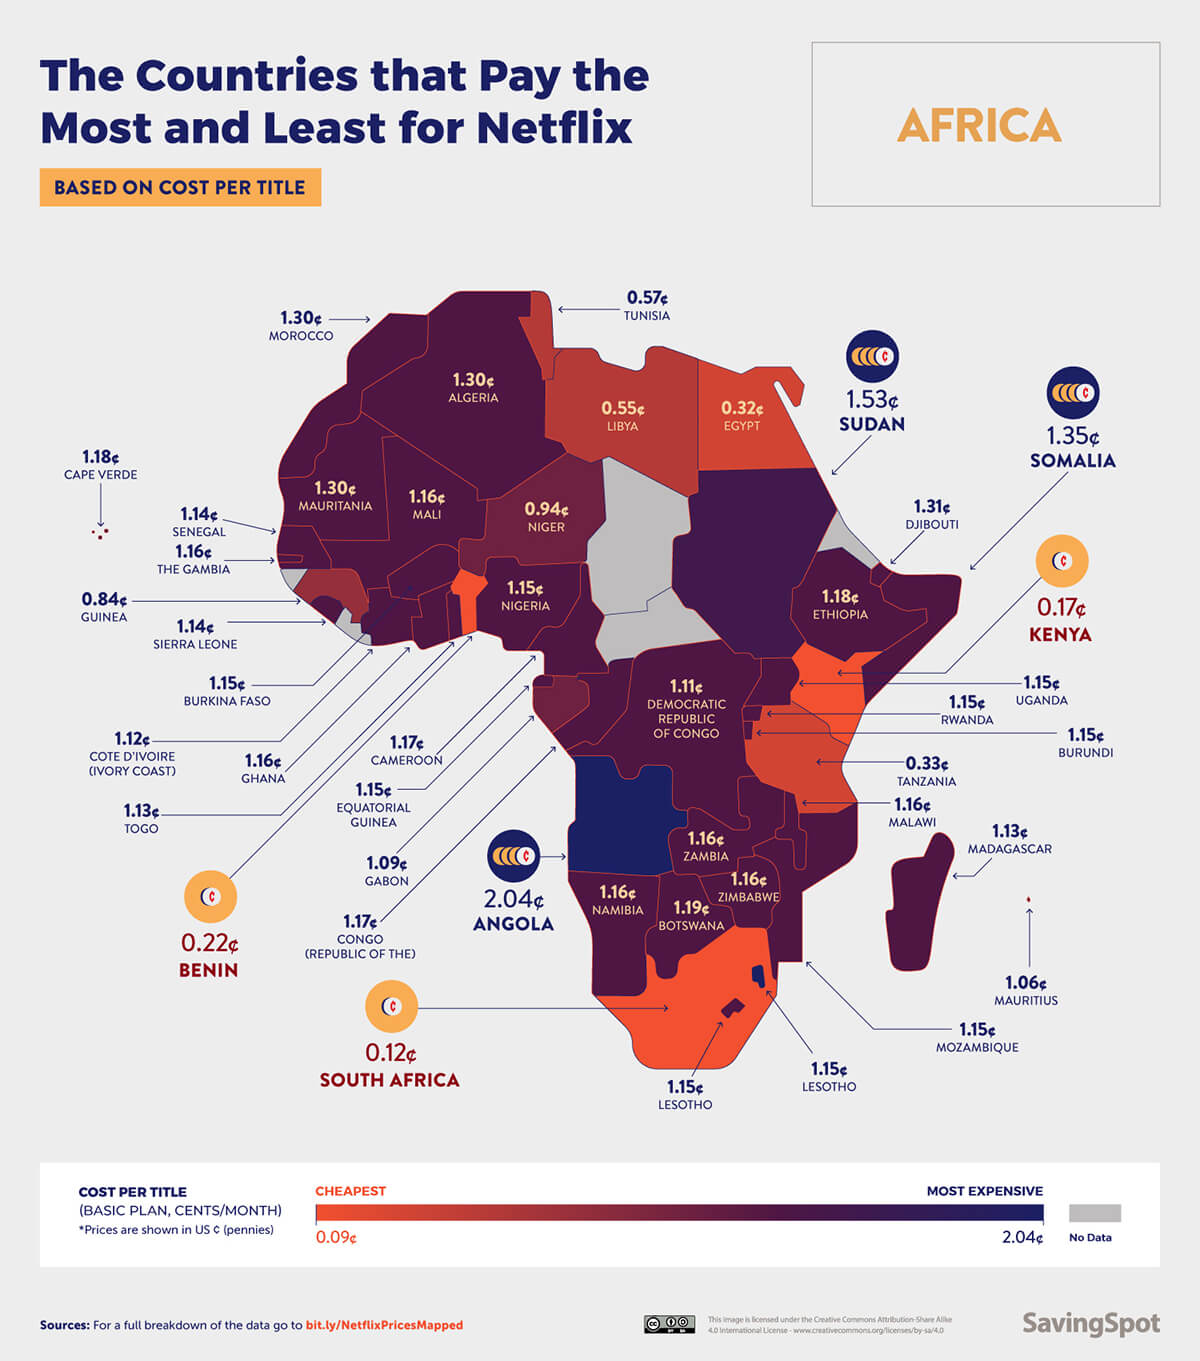 The Cost-per-title of Netflix in Africa